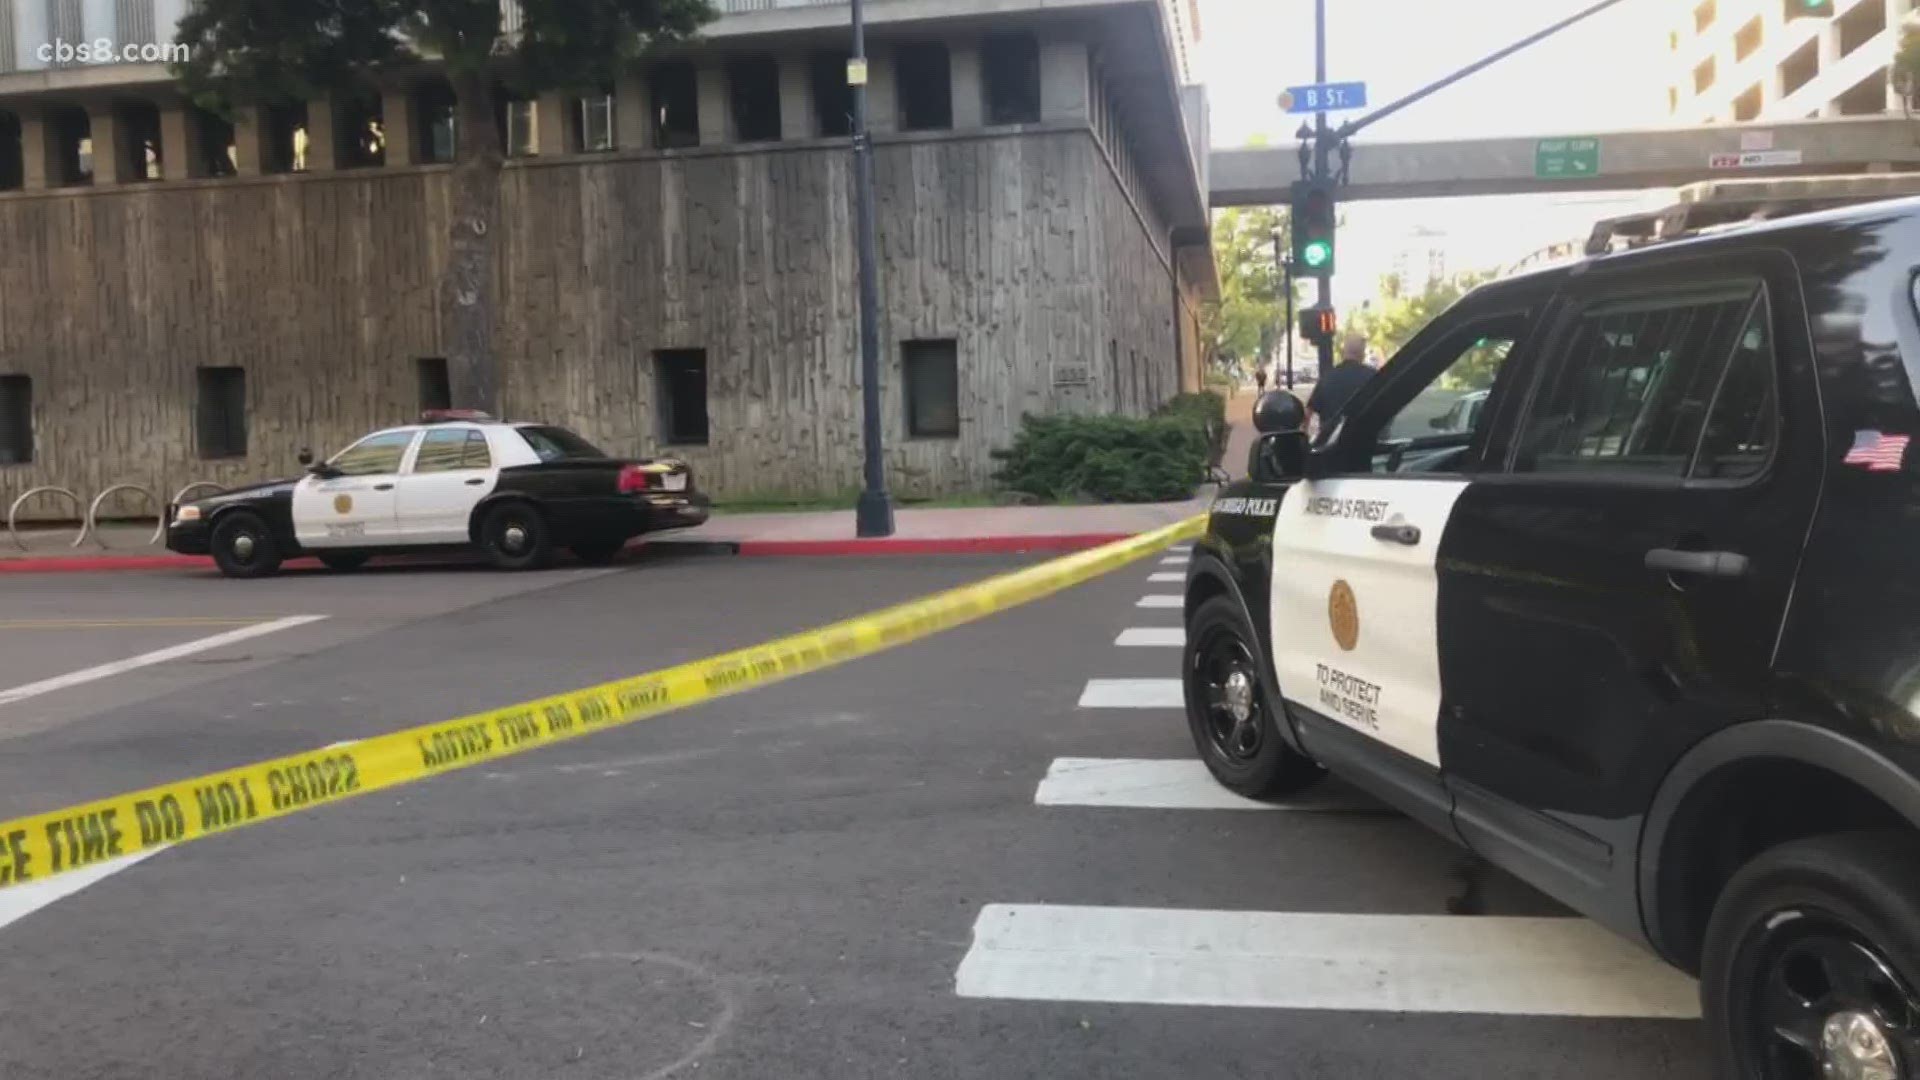 An officer-involved shooting was reported Friday afternoon at Front and West B streets in downtown San Diego.